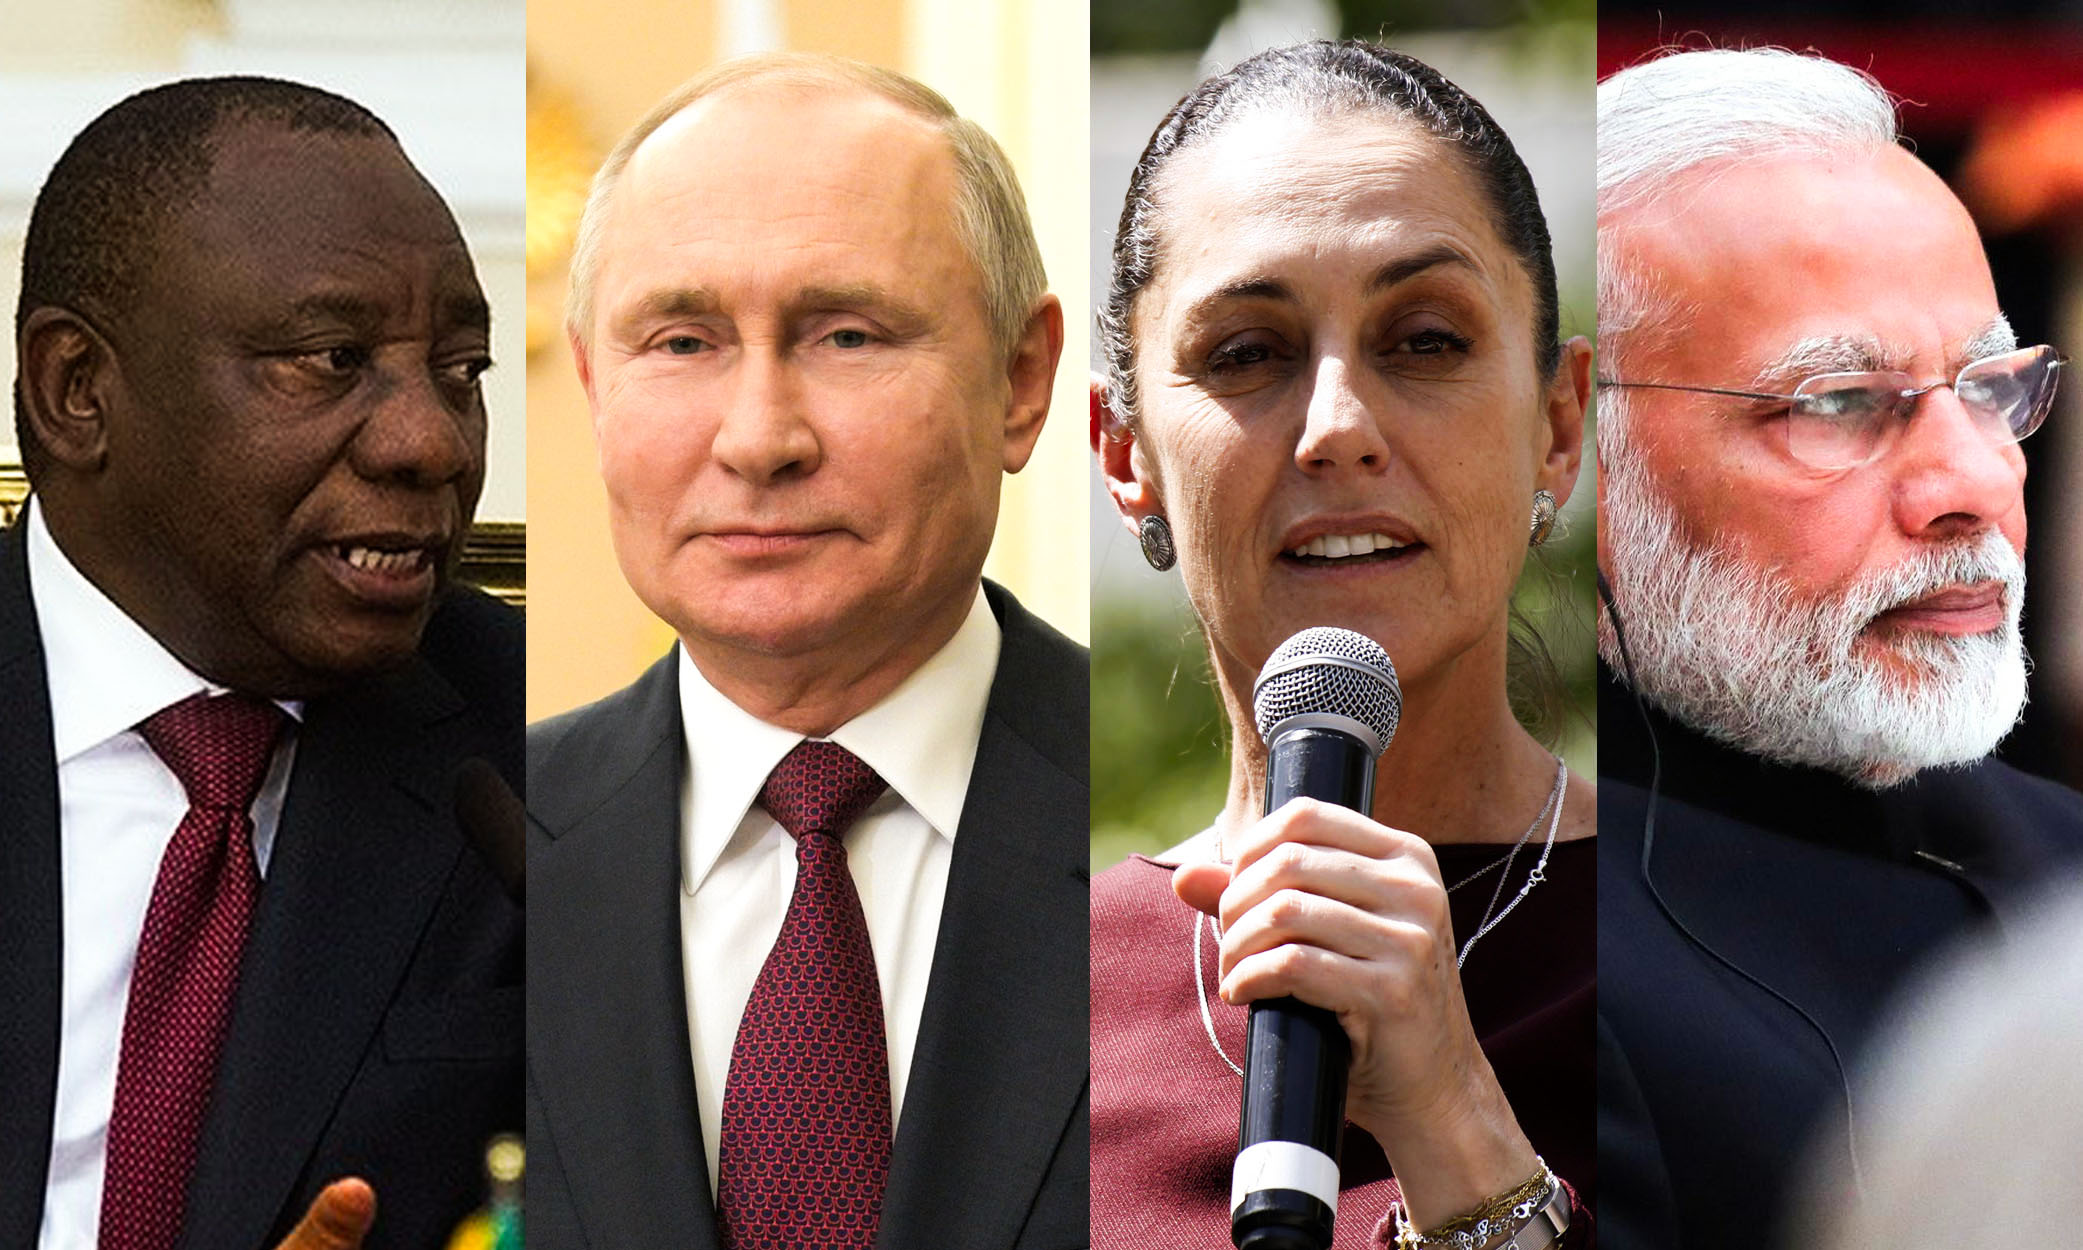 Claudia Sheinbaum, Vladimir Putin, Cyril Ramaphosa , and Narendra Modi will be key figures in the biggest election year in history.